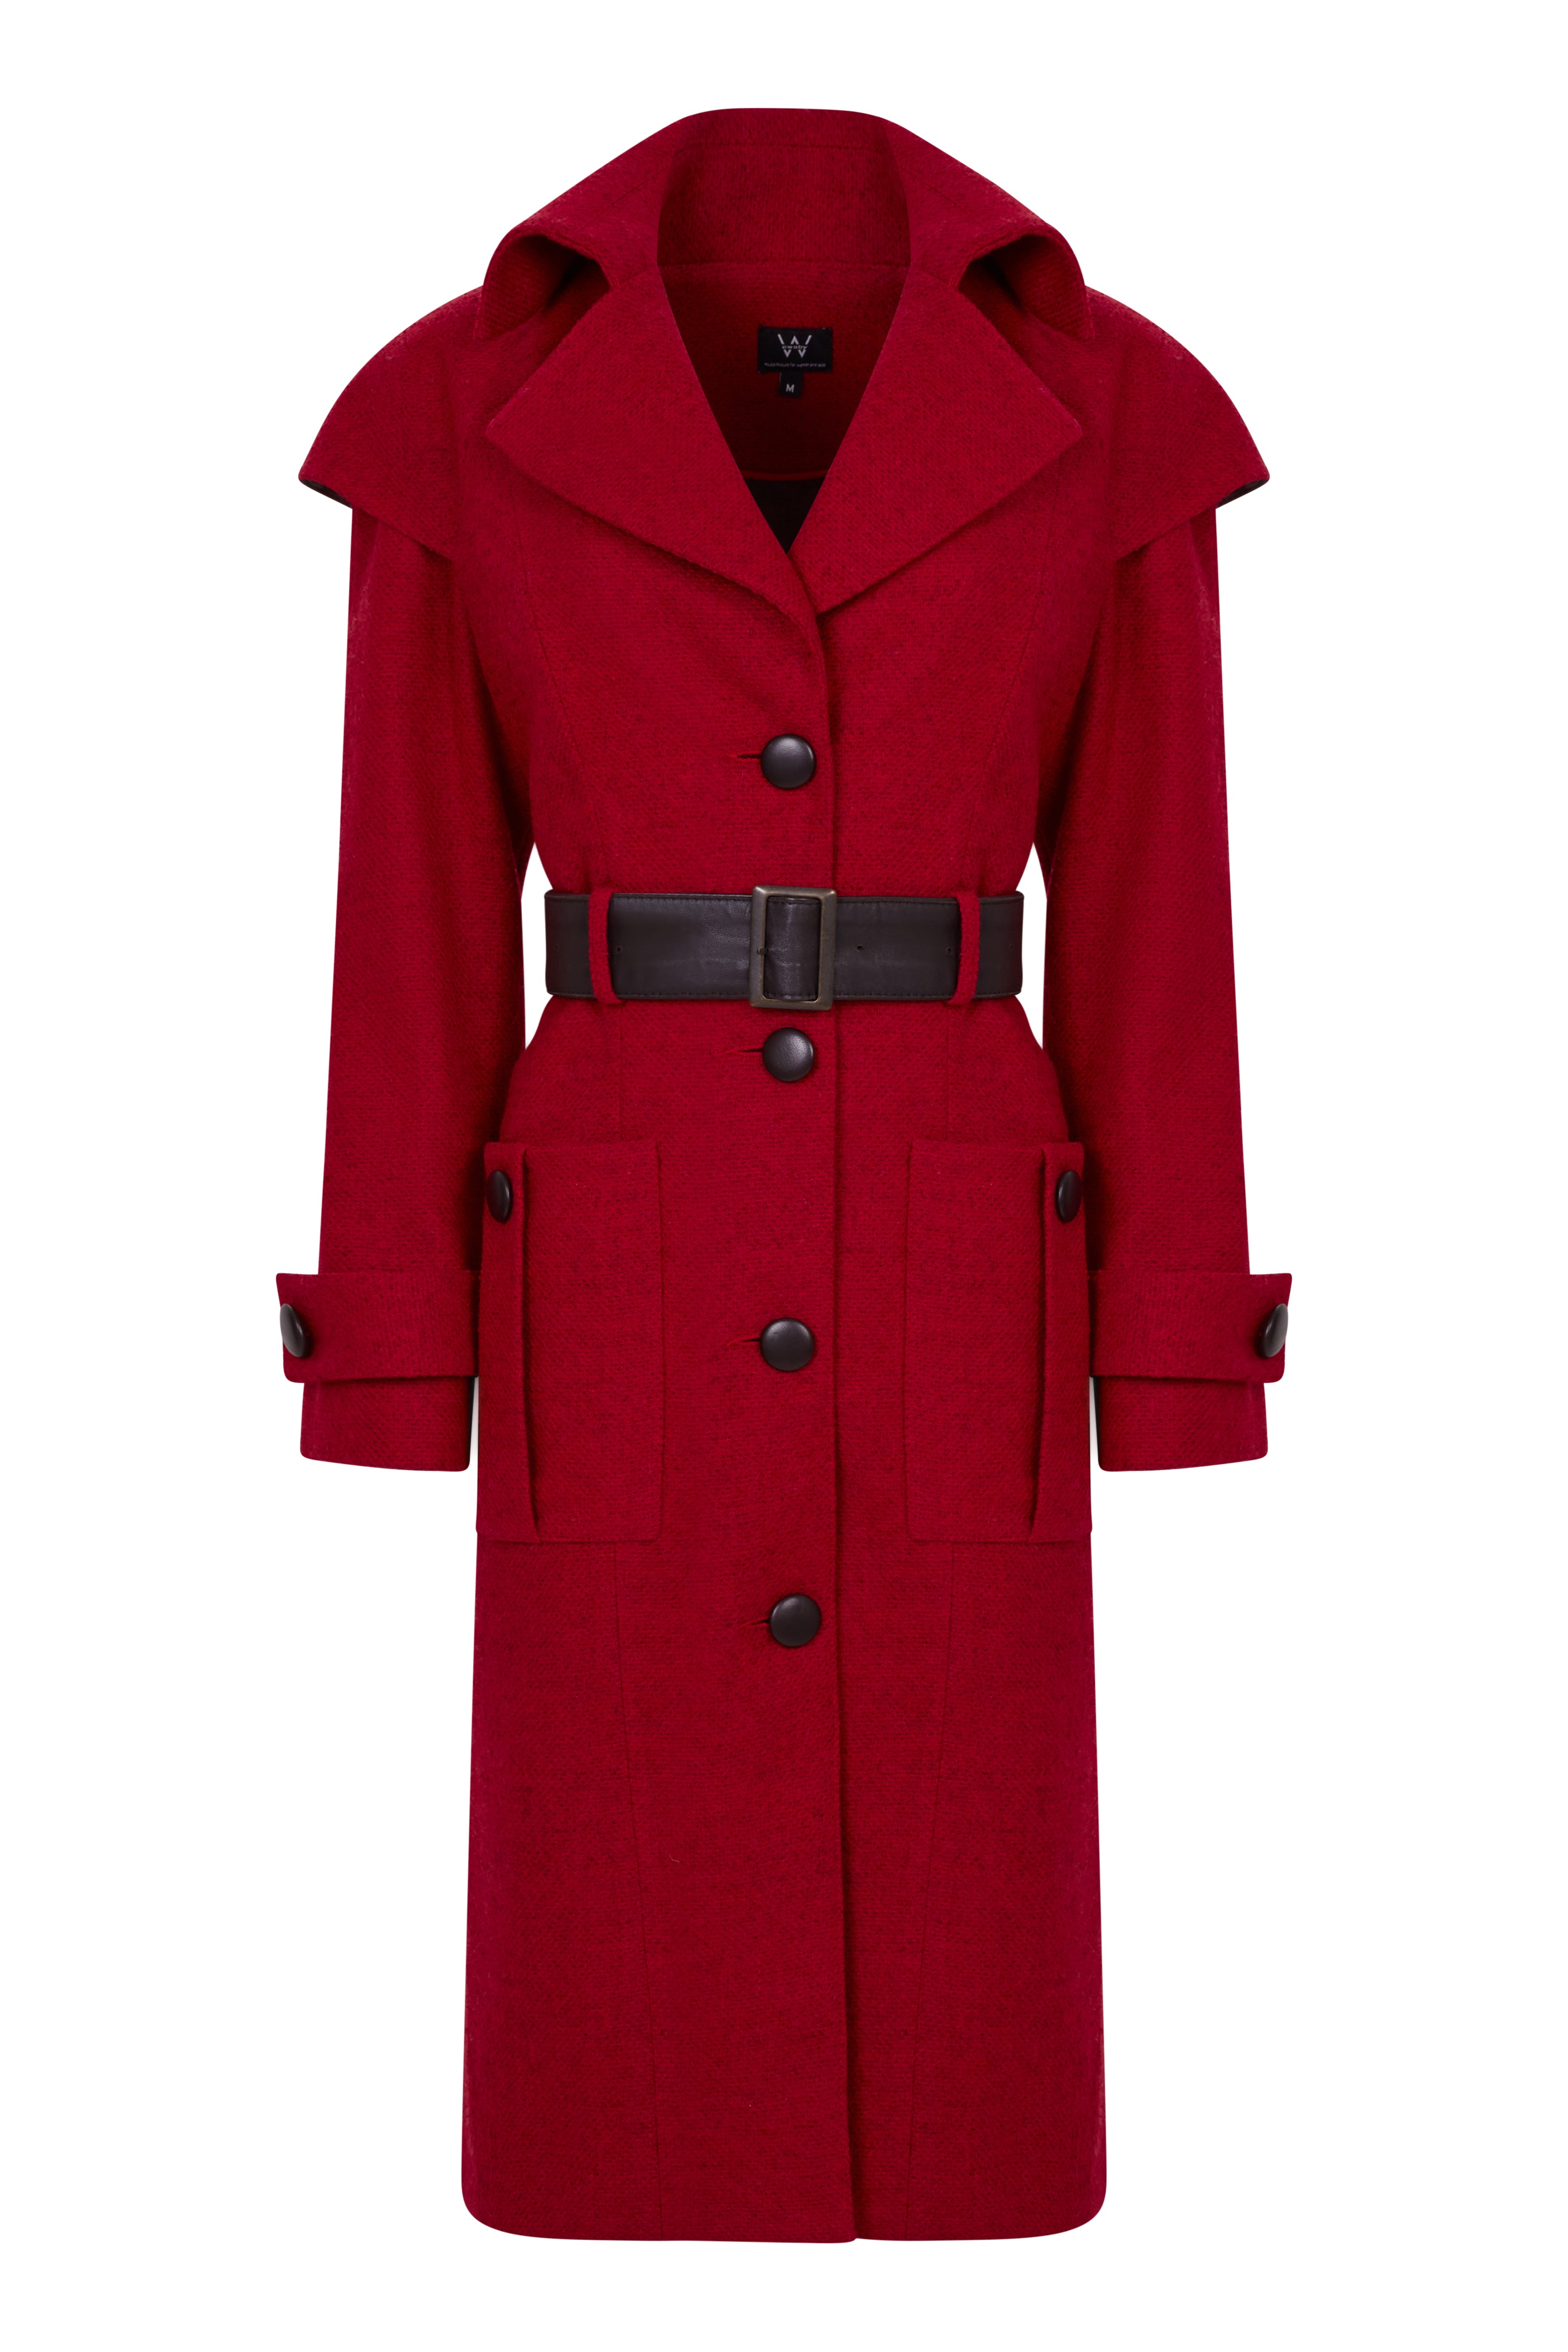 The red coat | wool with fur details